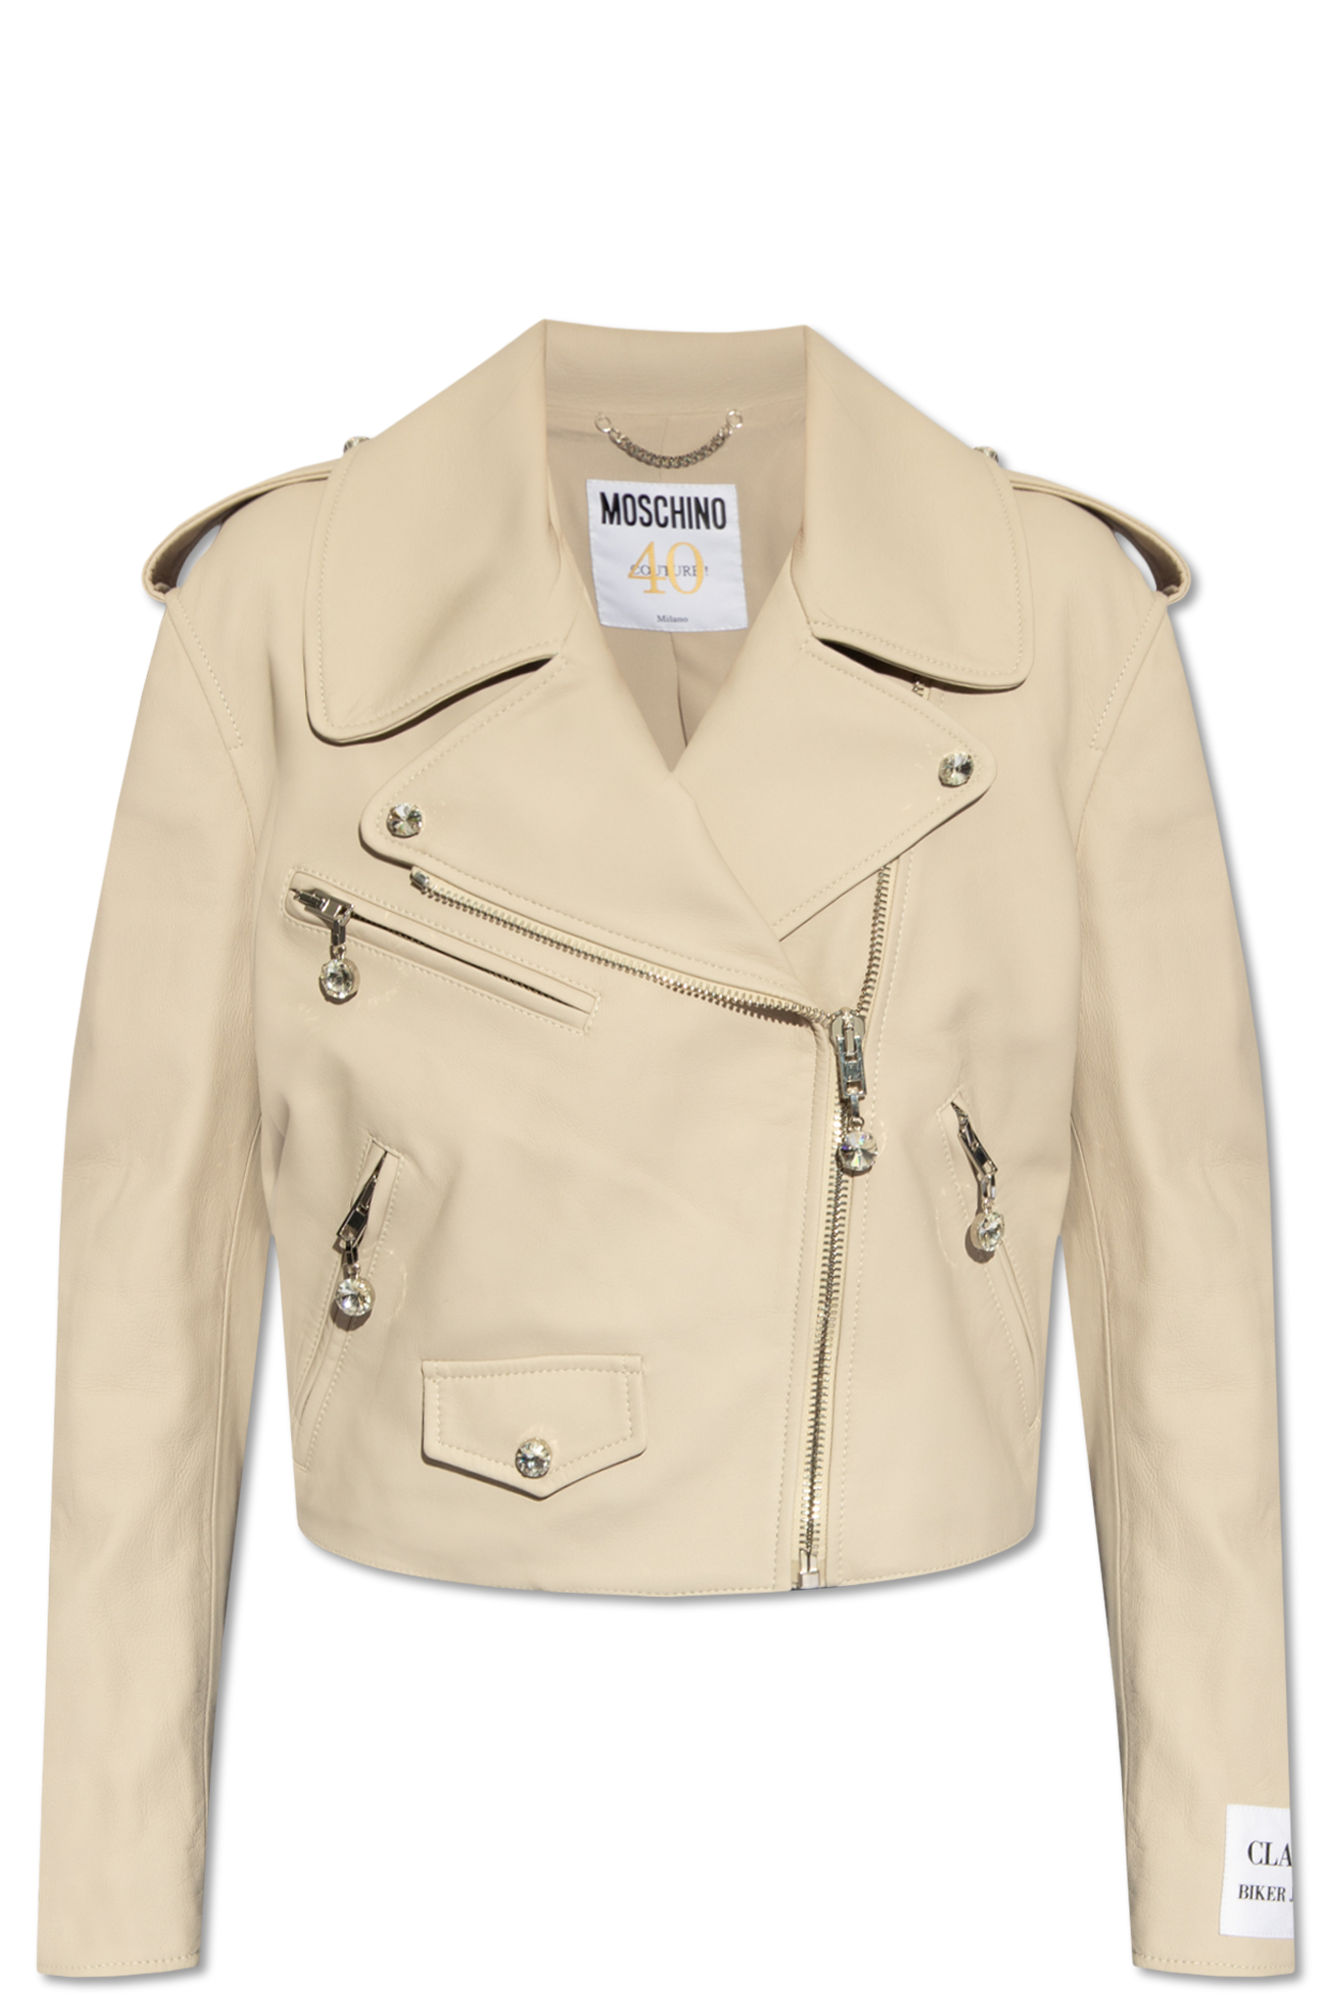 Moschino '40th Anniversary' leather jacket, Women's Clothing